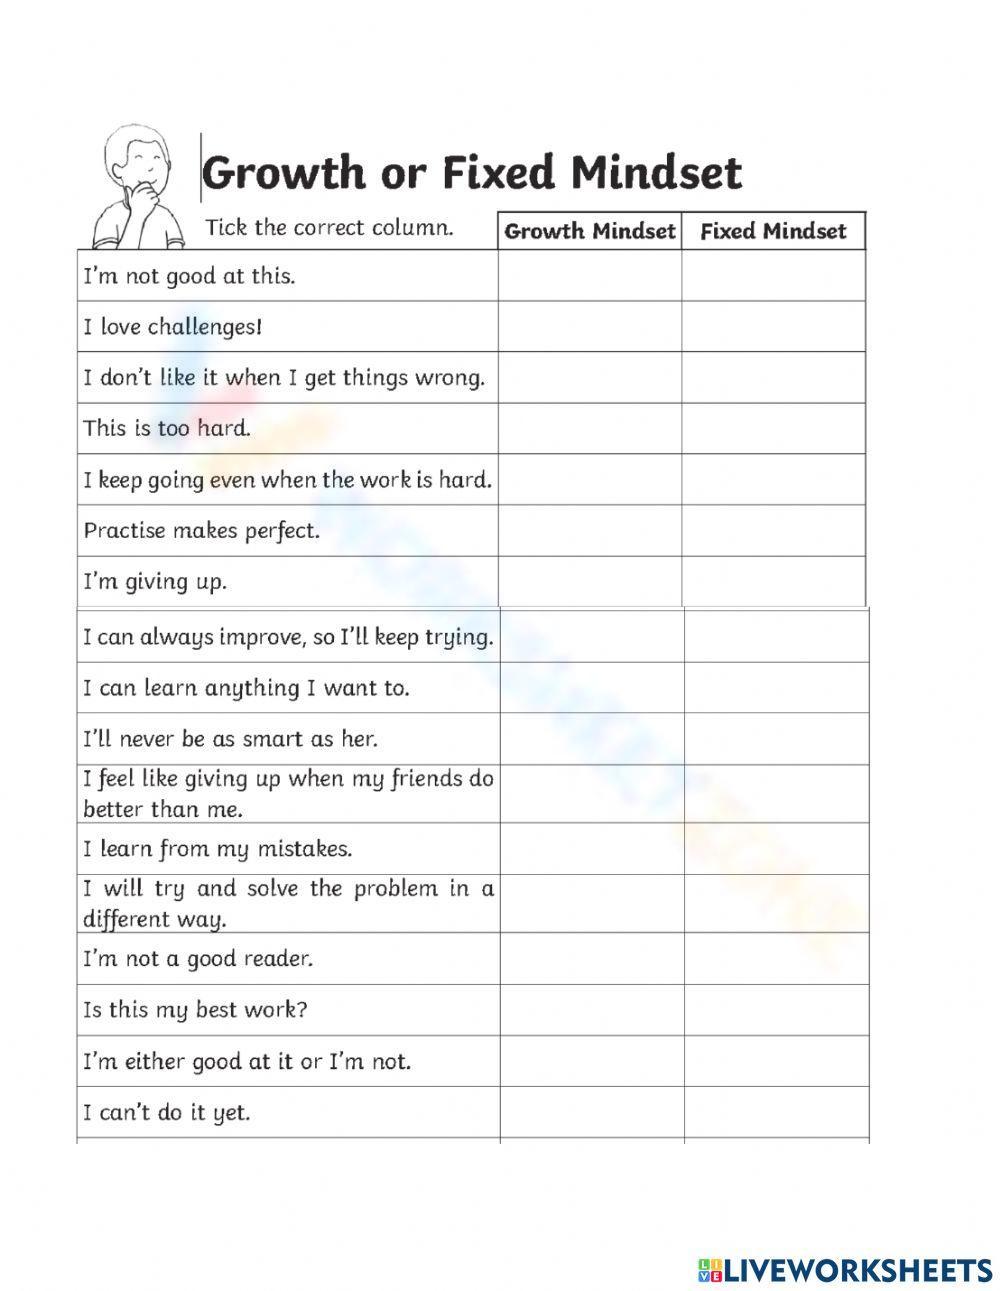 Free Printable Growth Mindset Worksheets For All Ages